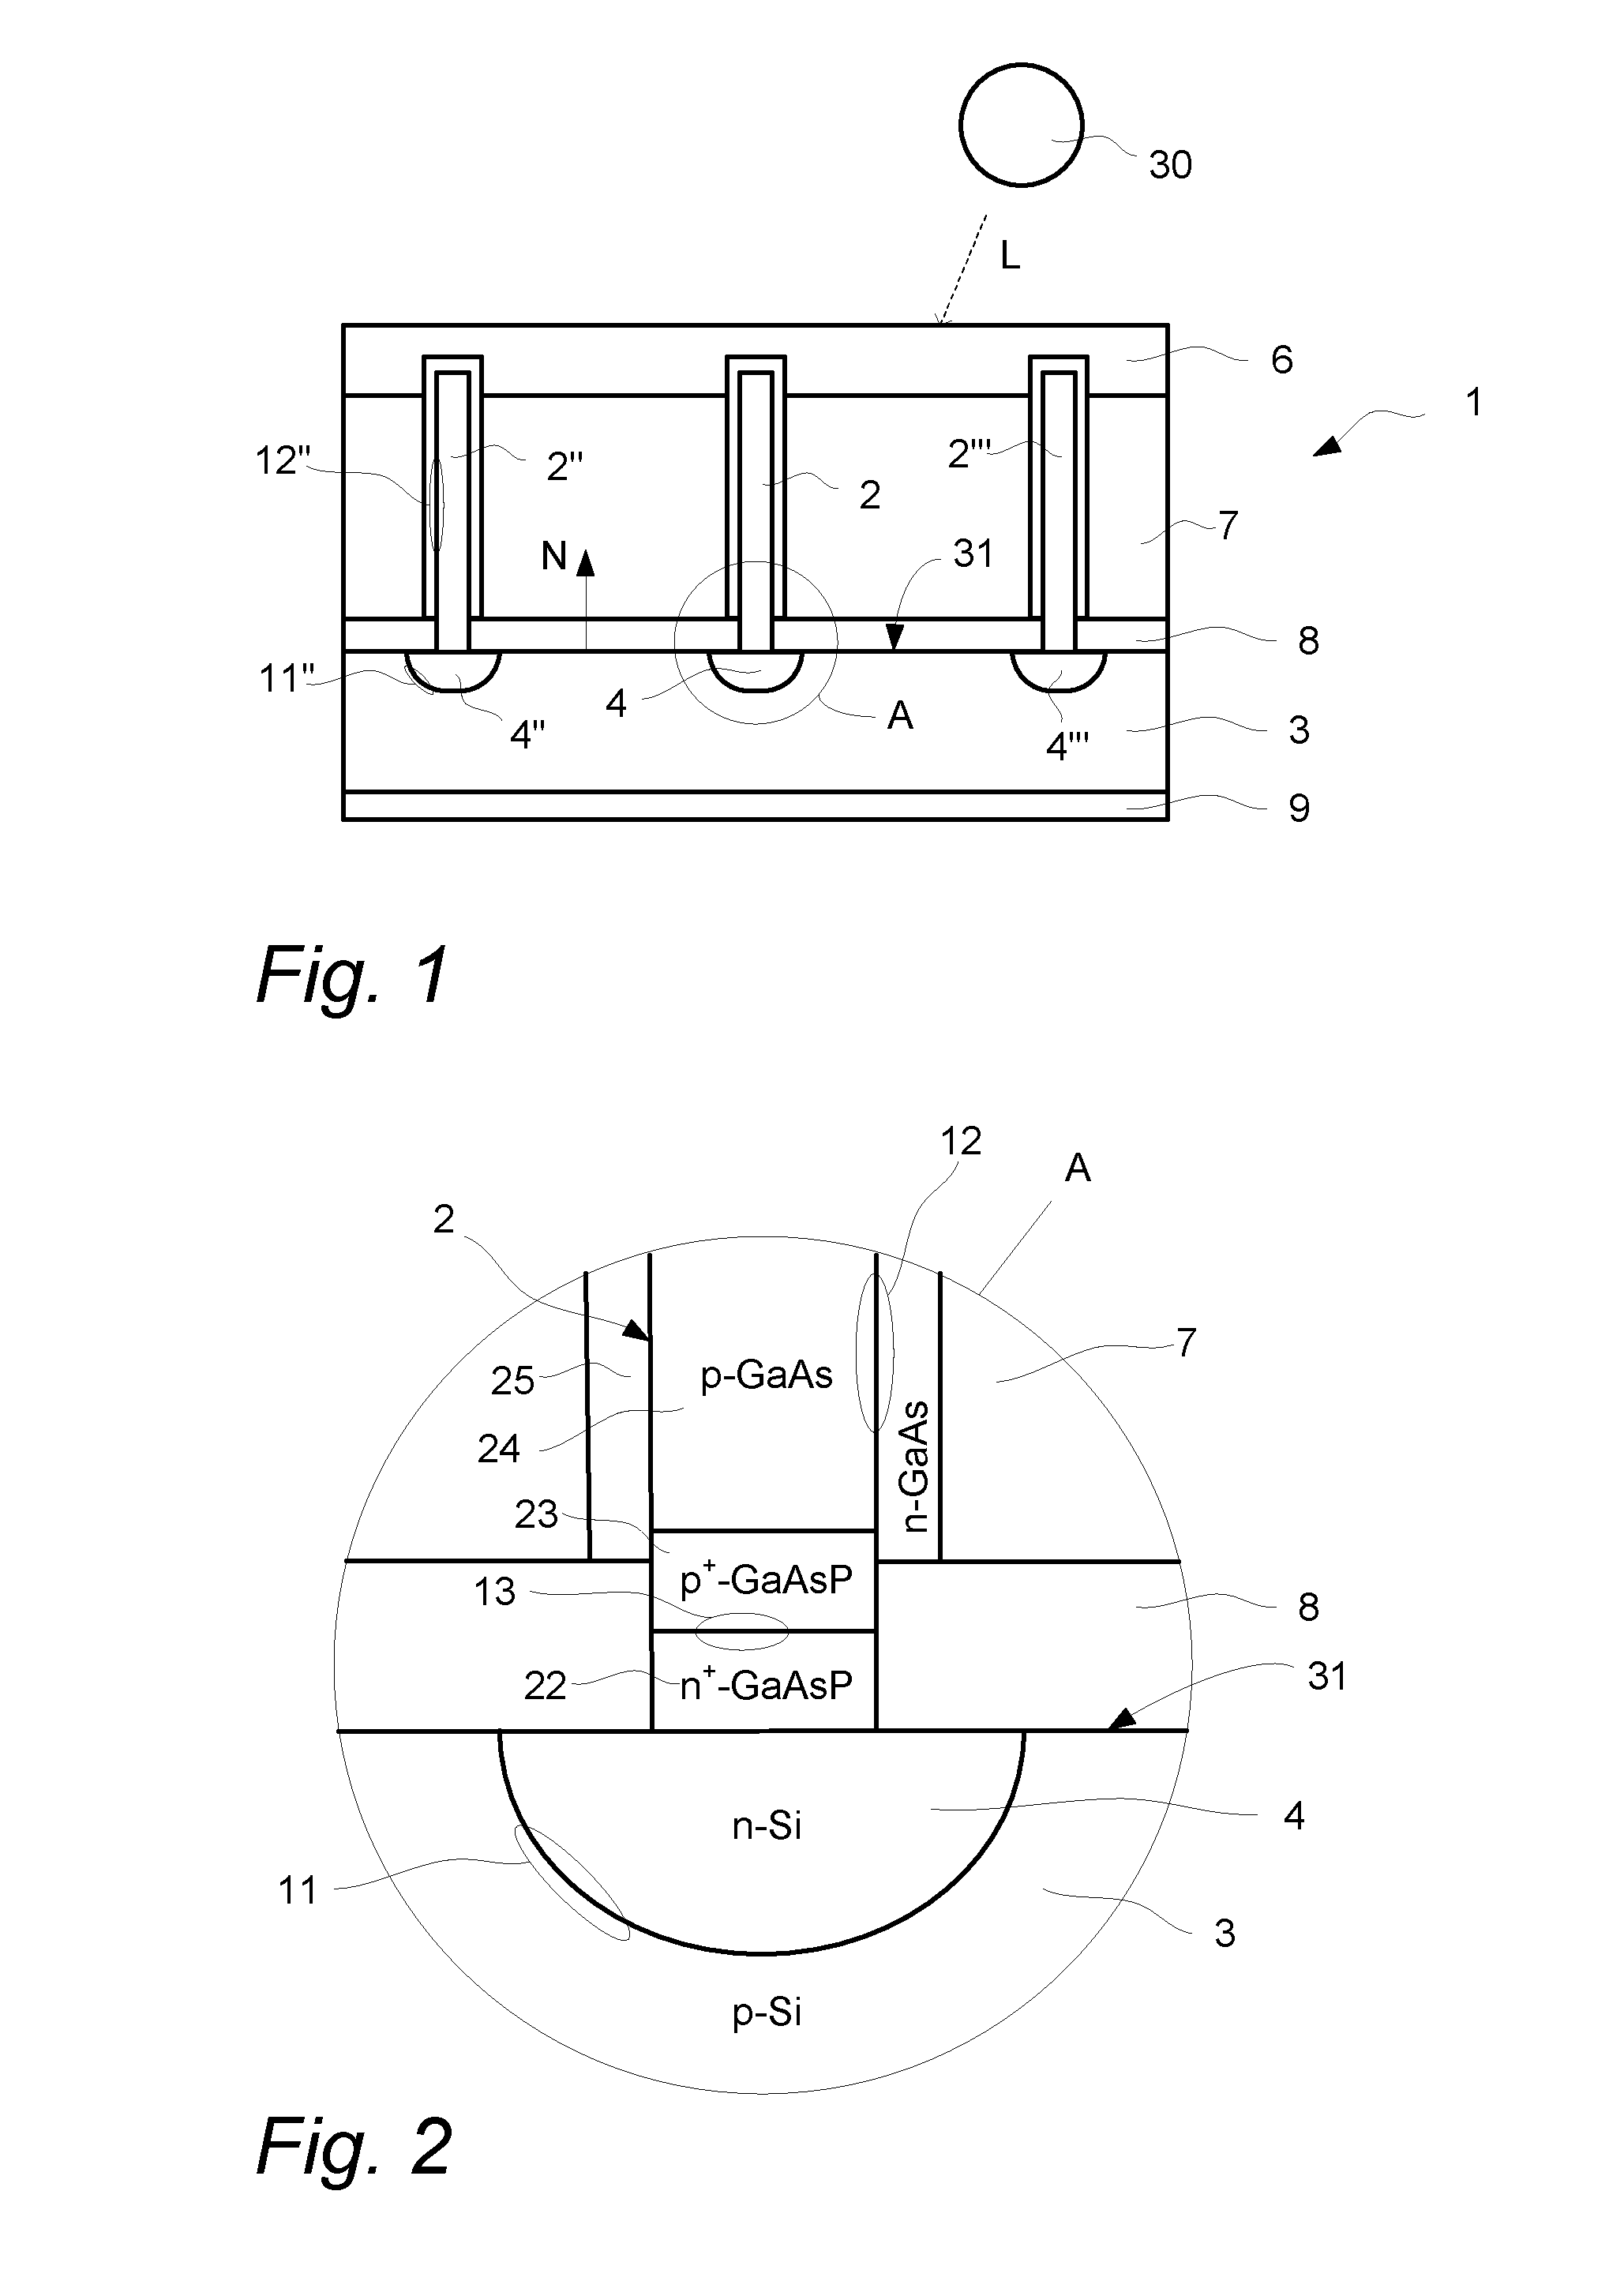 Multi-junction photovoltaic cell with nanowires